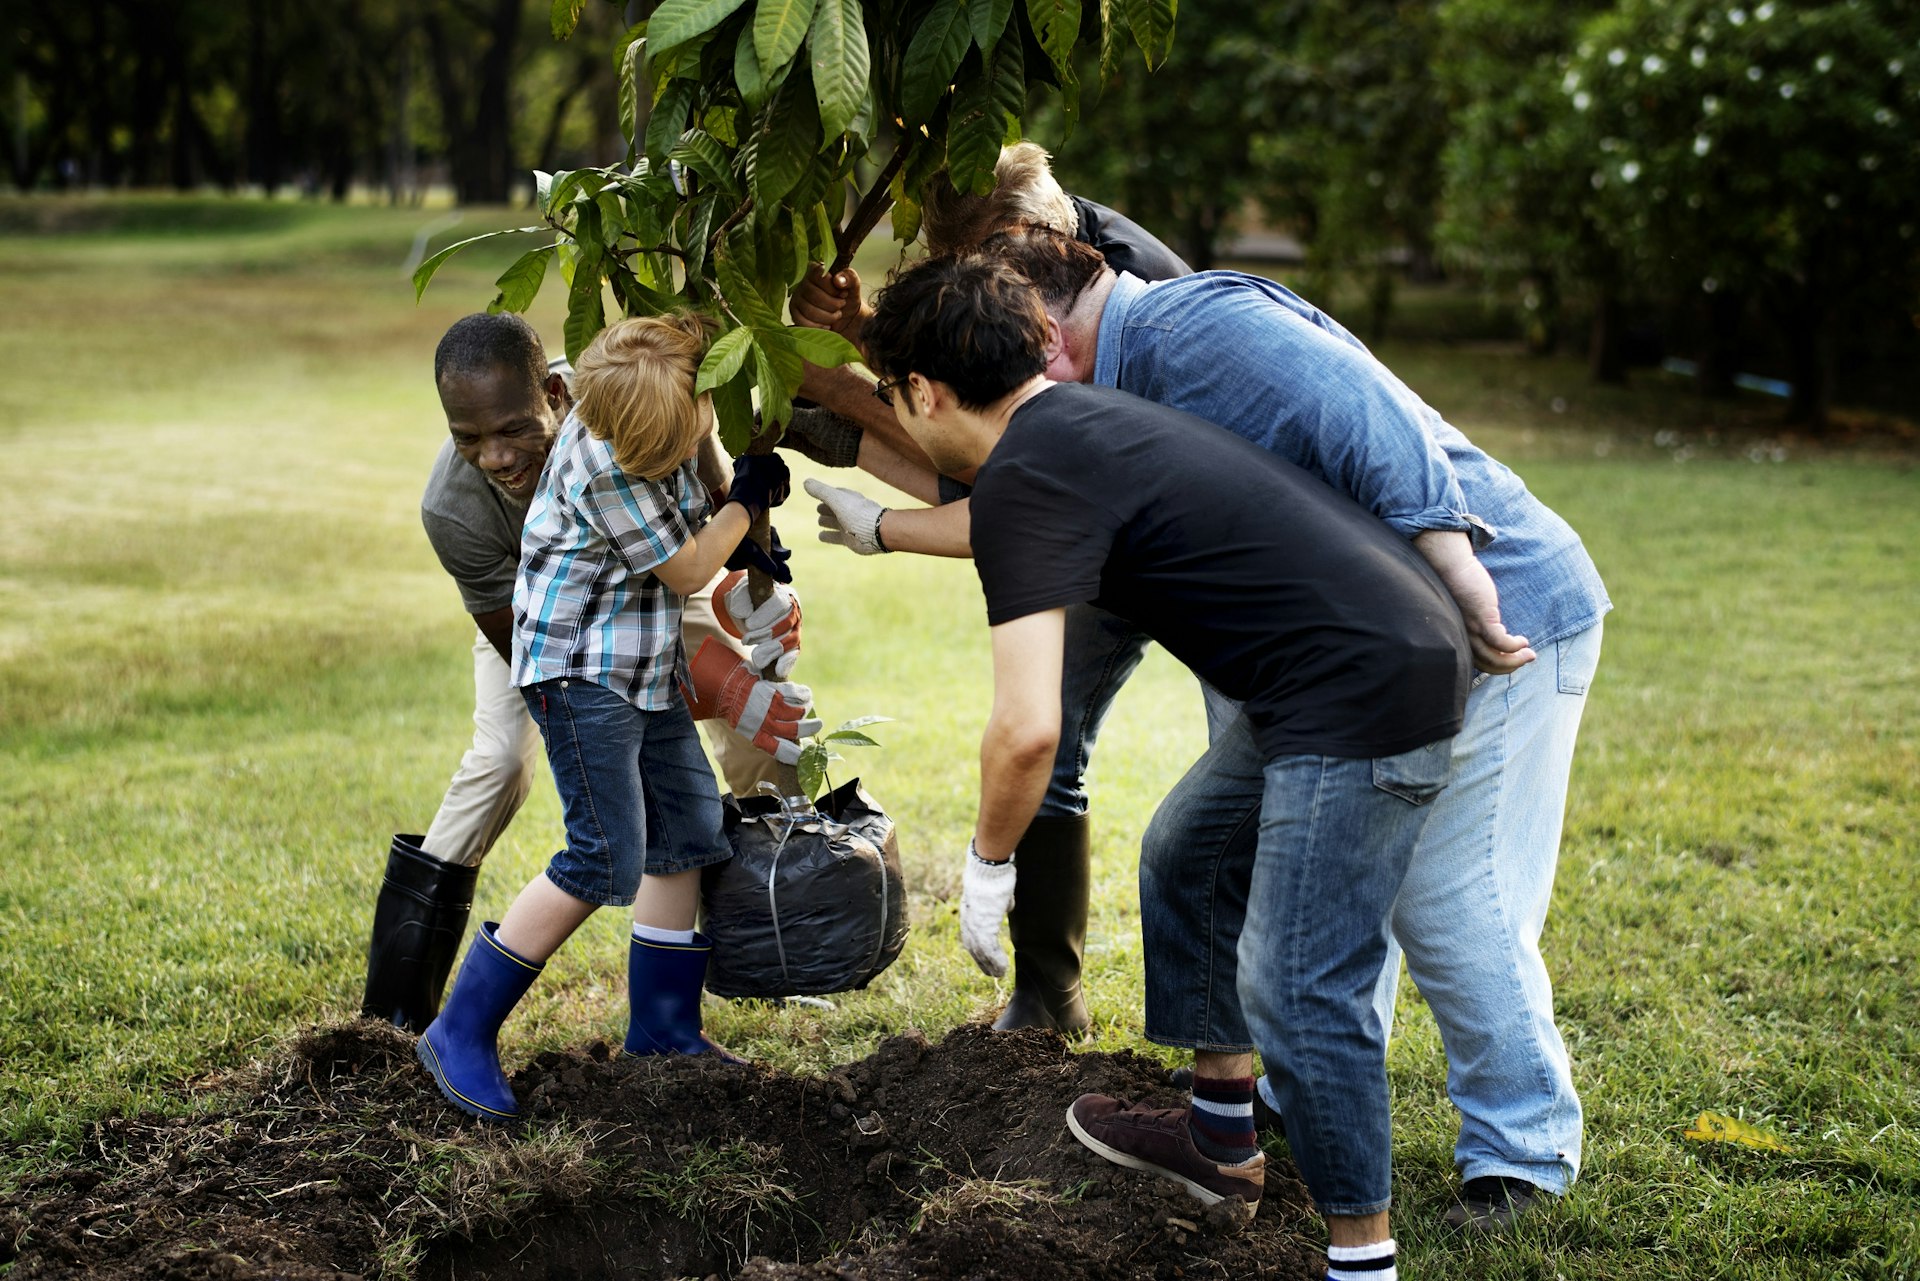 A group of four adults and a child lift a small tree towards a hole